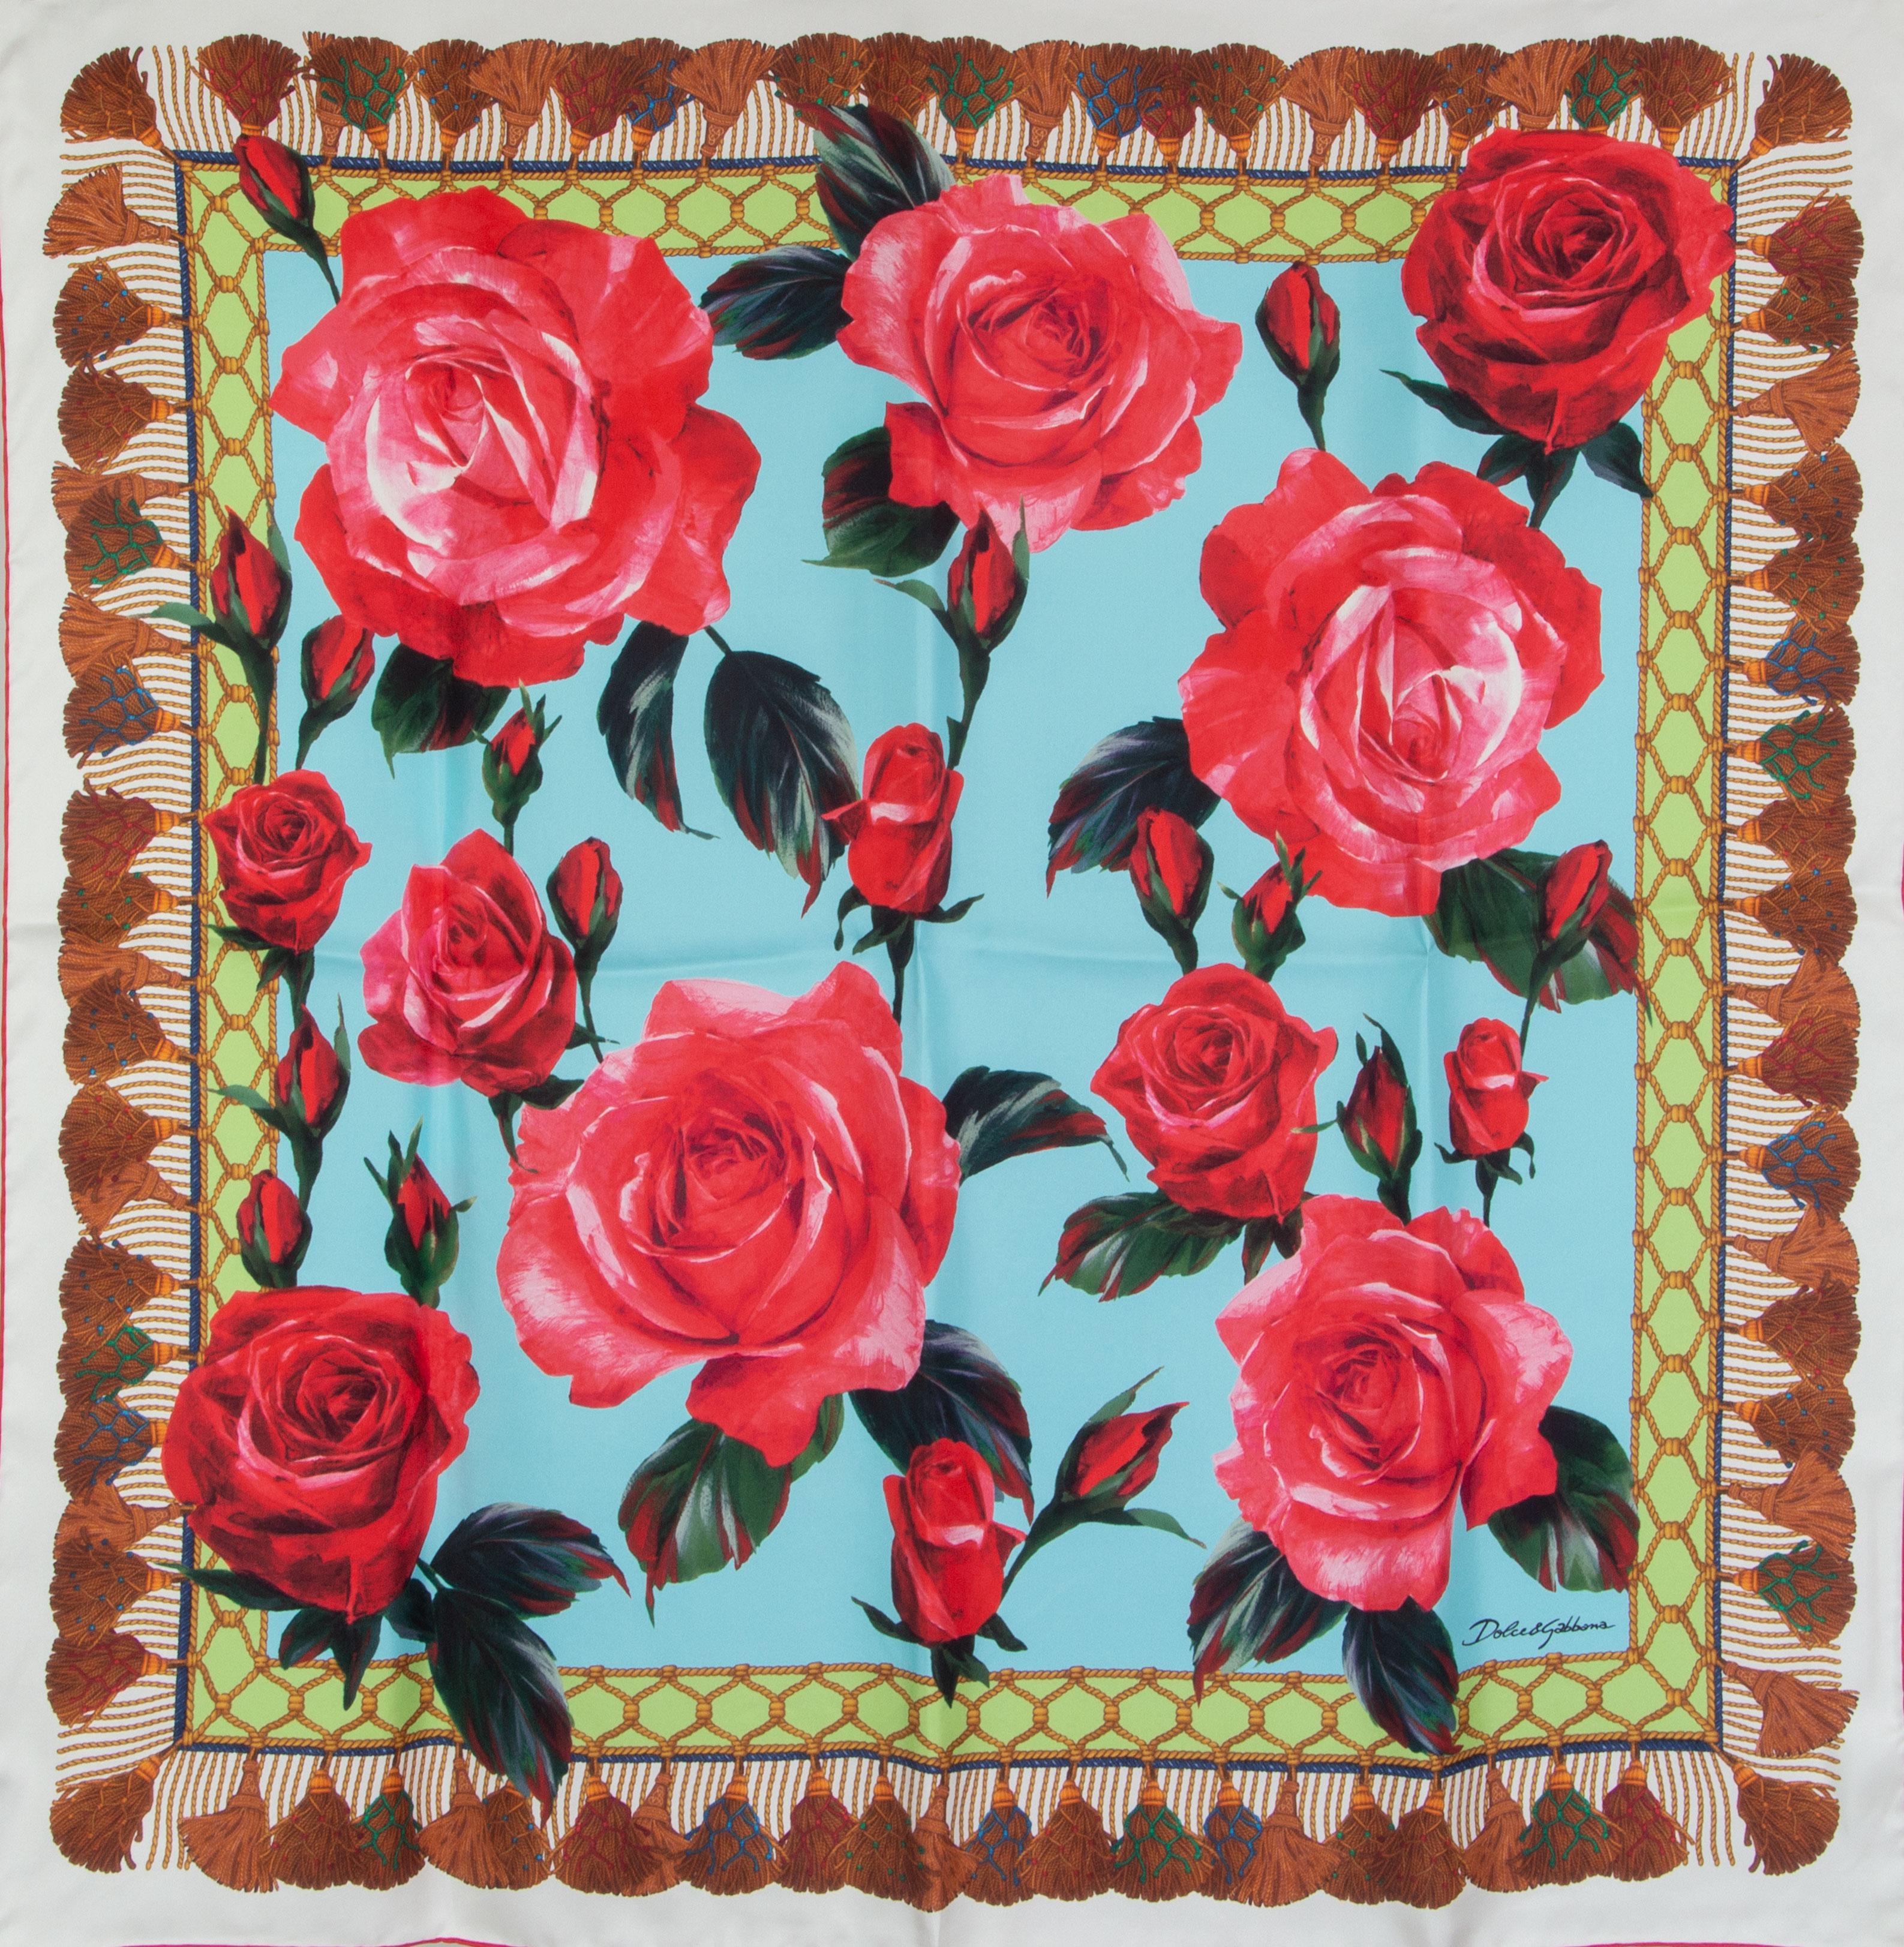 Dolce & Gabbana rose and tassel-print scarf in red, pink, rose, lime green,light blue, cognac and forest green silk (100%). Has been worn and is in excellent condition. 

Width 90cm (35.1in)
Length 90cm (35.1in)
